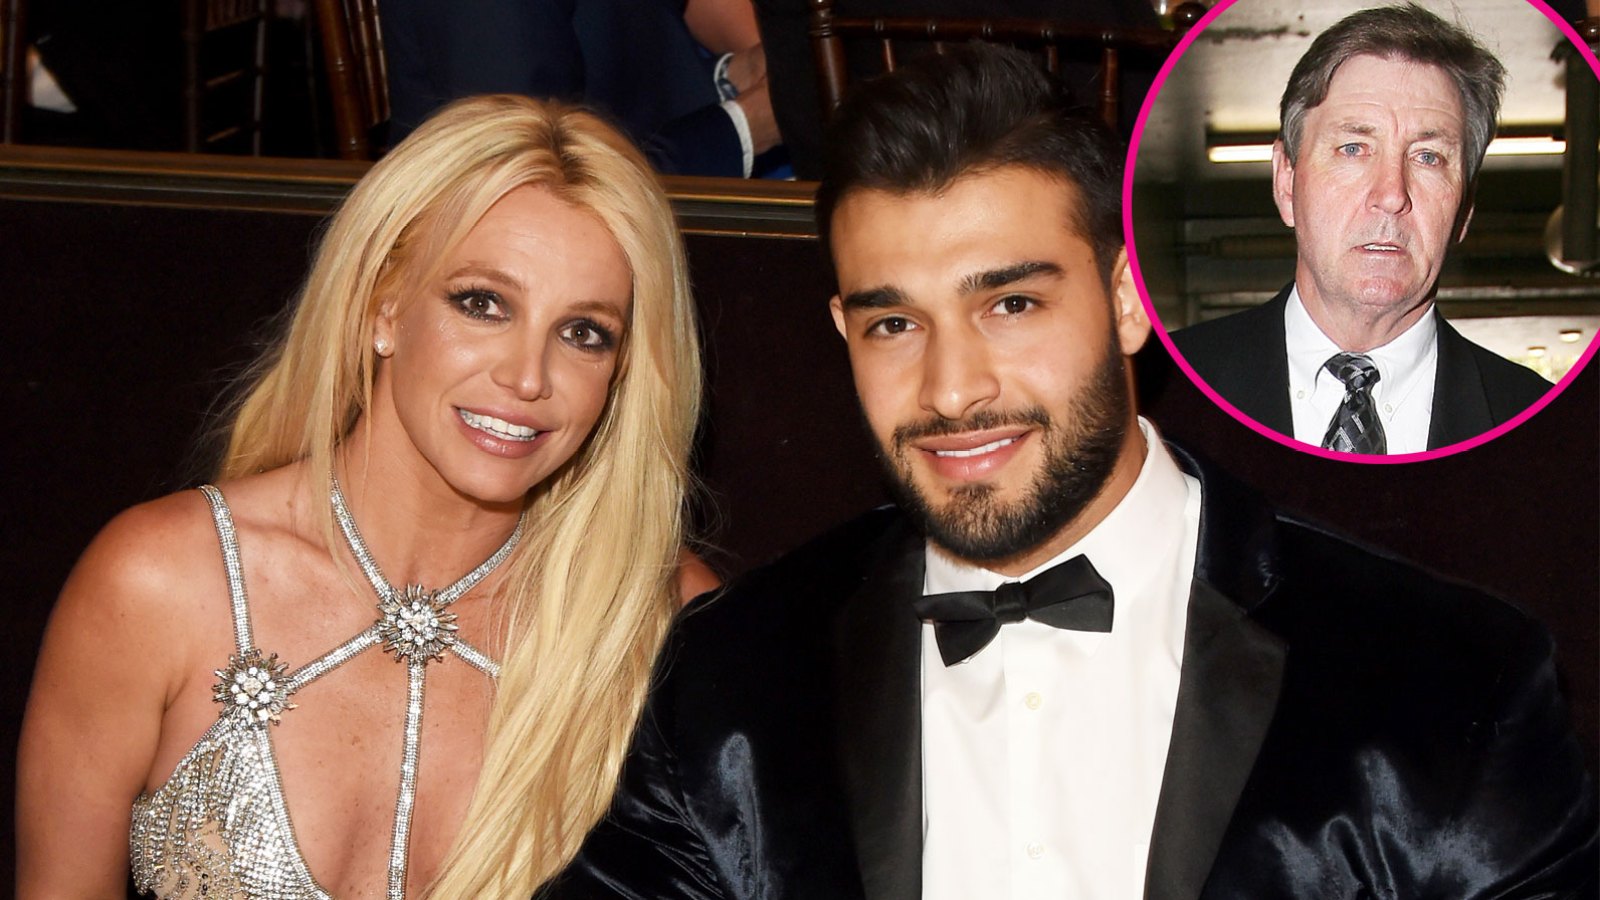 Britney Spears’ Boyfriend Sam Asghari Has ‘Been Supportive’ Amid Dad Jamie Spears’ Health Issues: ‘He Treats Her Like a Queen’